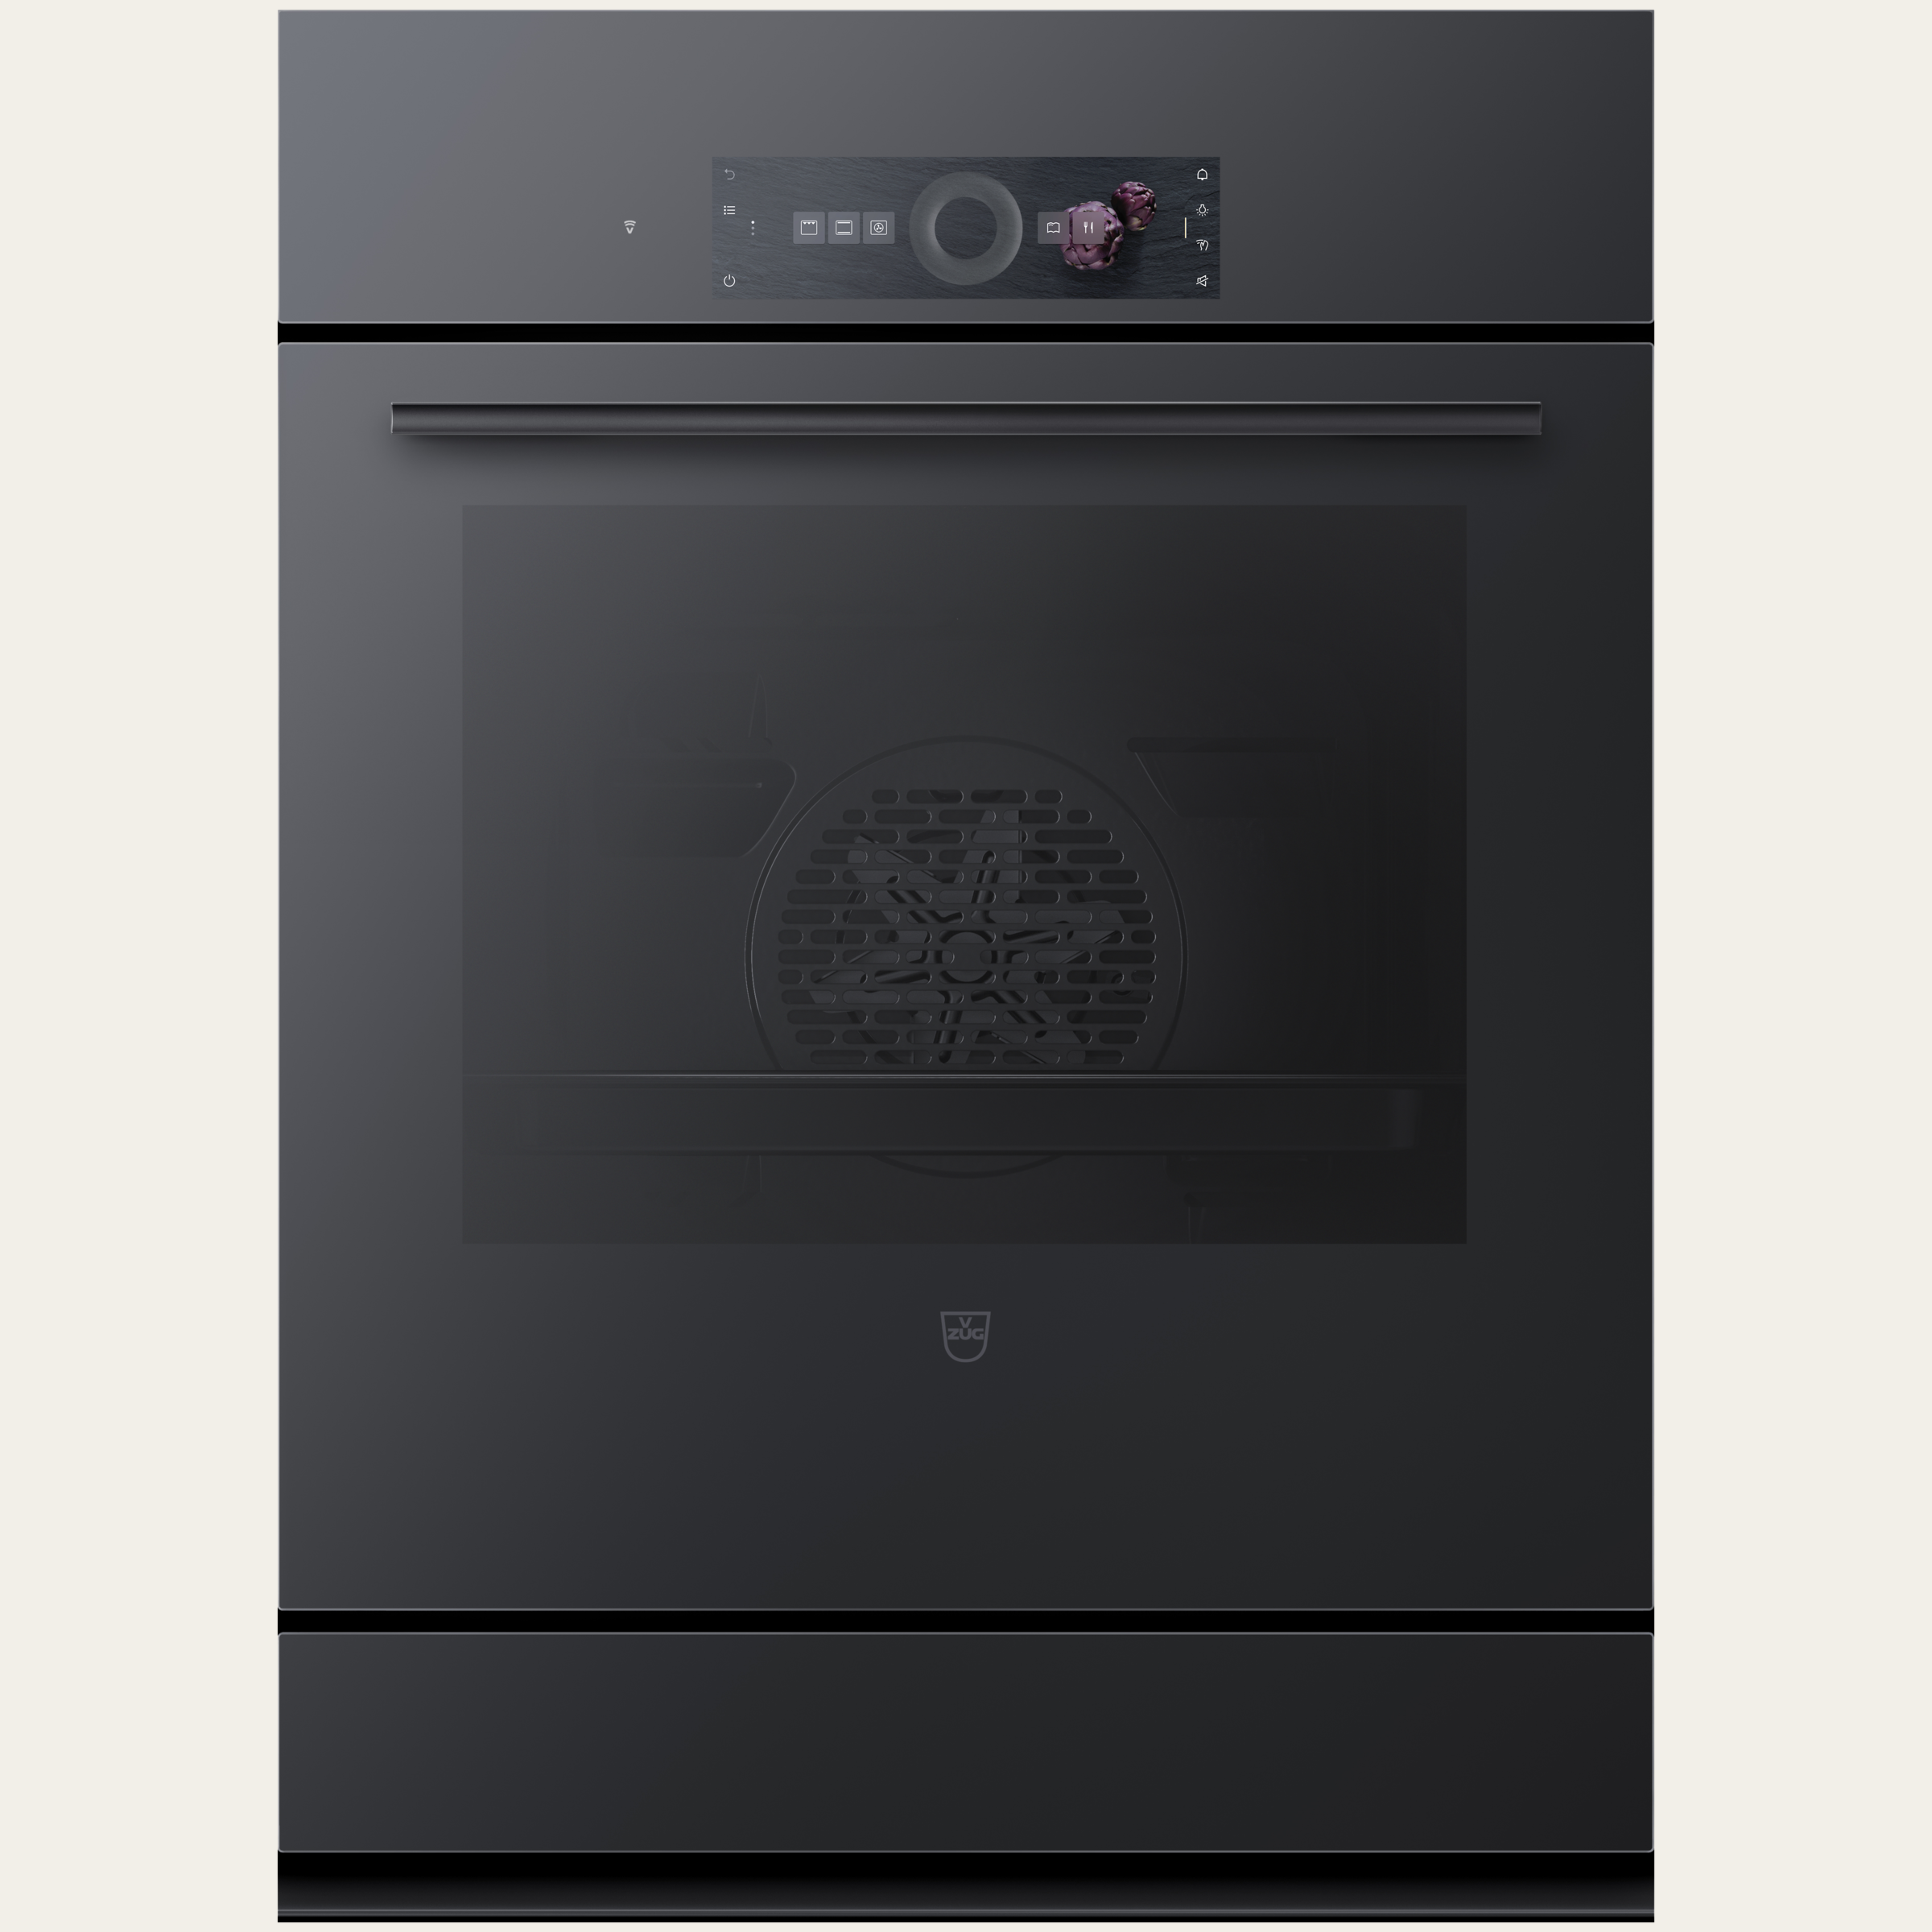 V-ZUG Oven Combair V4000 7UC, Standard width: 55 cm,Standard height: 76.2 cm, Black mirror glass, Installation in floor unit, Touchscreen with CircleSlider, V-ZUG-Home, TopClean, Appliance drawer